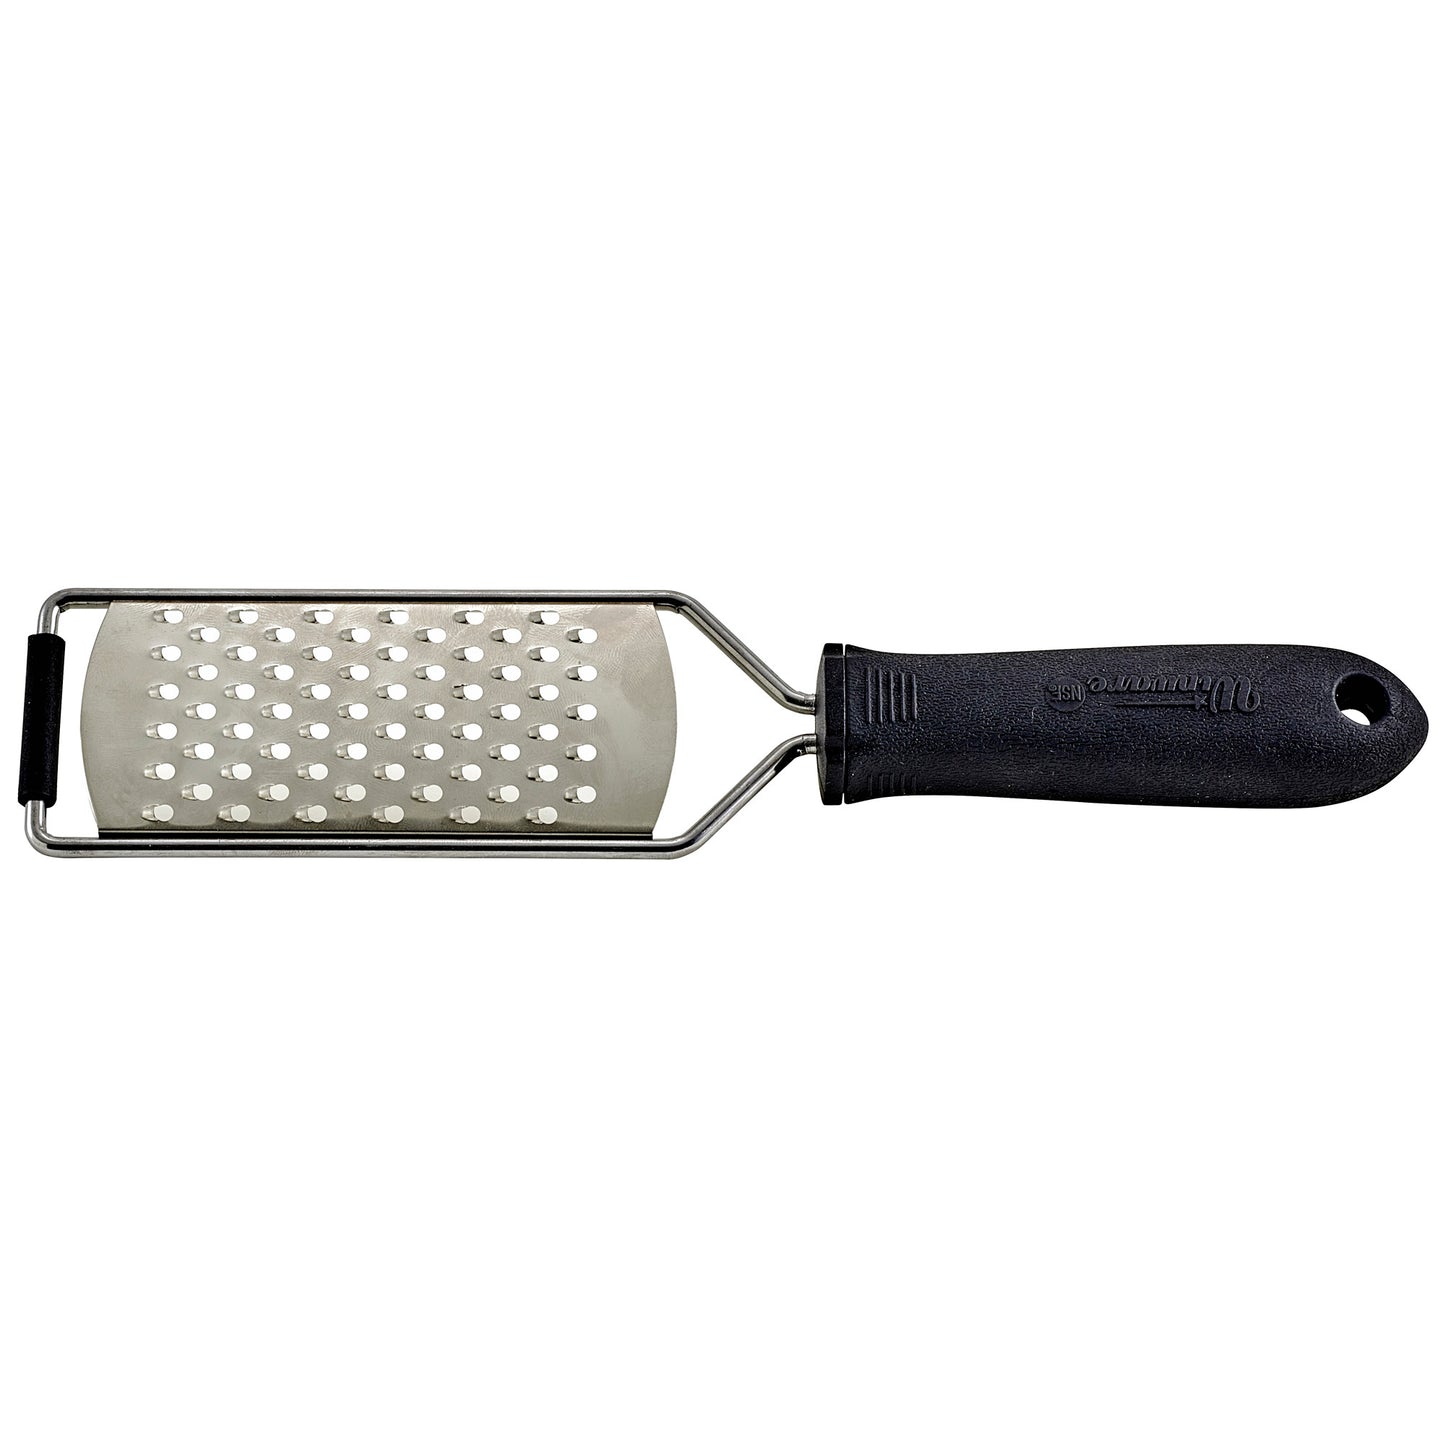 VP-312 - Grater with 3mm Dia. Holes with Soft Grip Handle